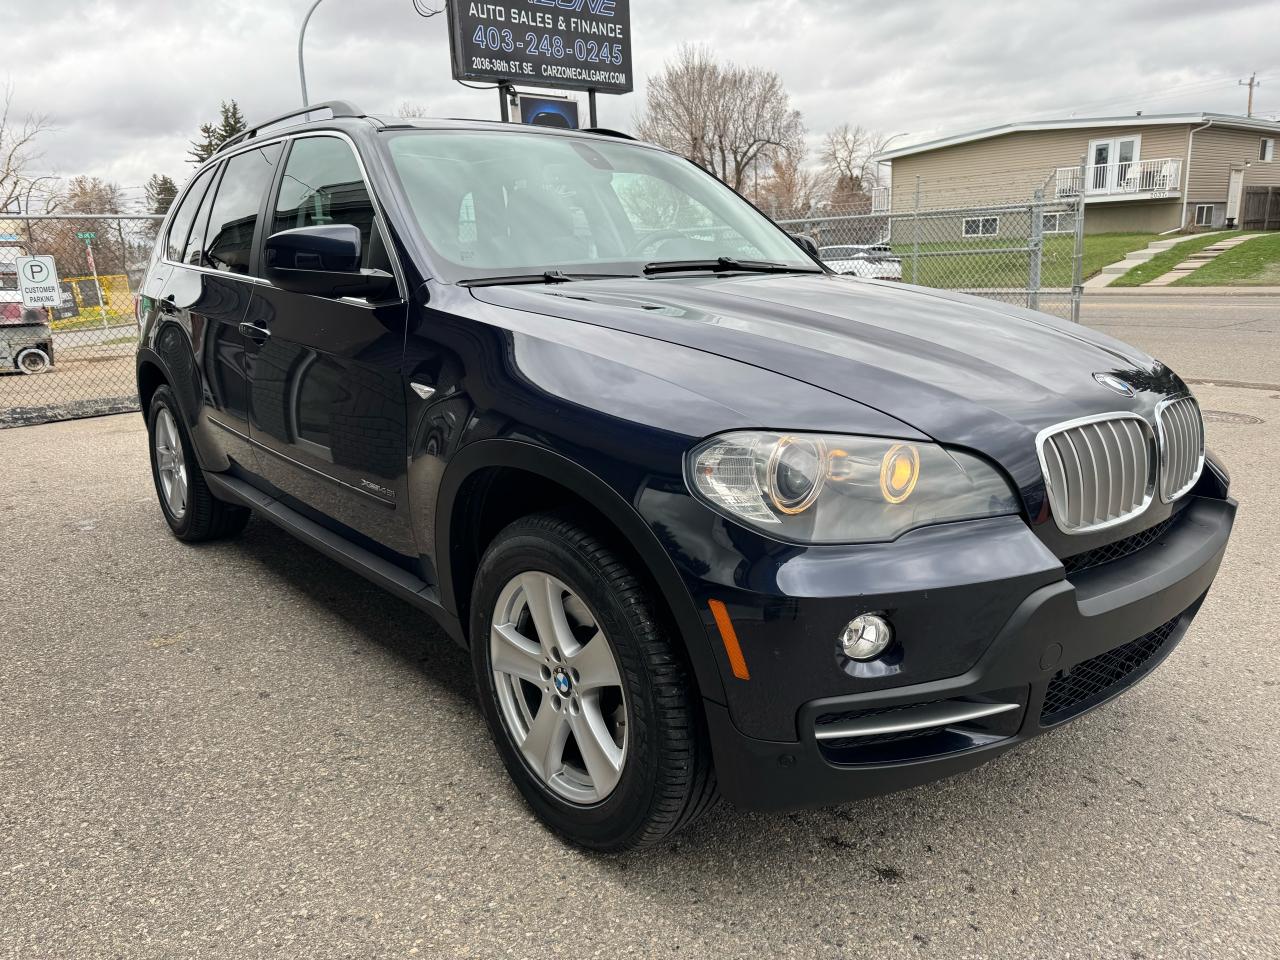 2009 BMW X5 AWD 4.8 1 Owner No Accidents - Photo #23